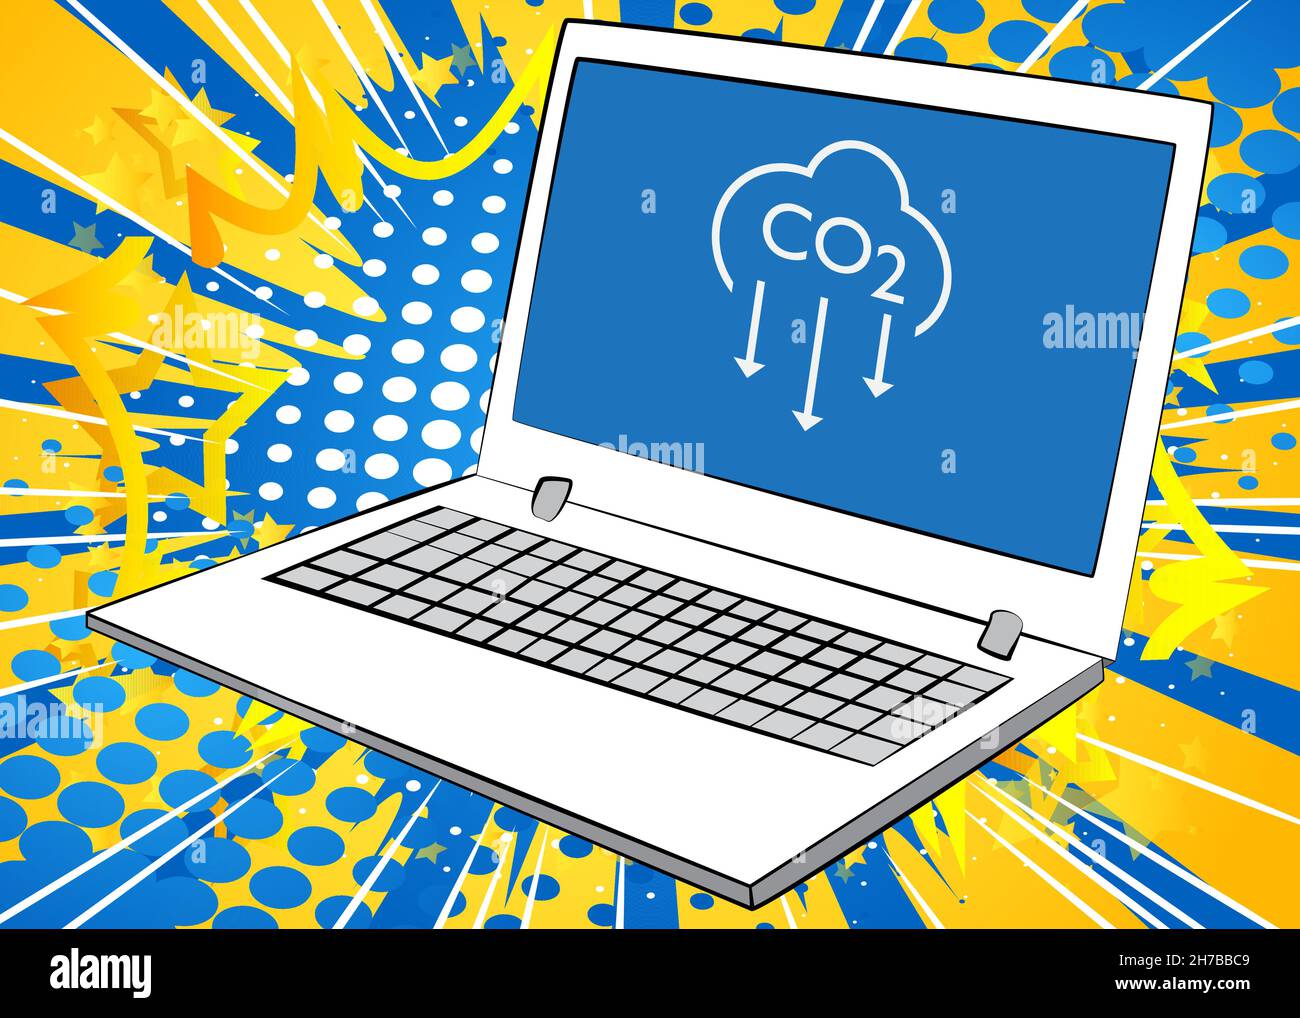 Laptop with CO2 emission sign, Carbon dioxide icon on the screen. Vector cartoon illustration. Stock Vector